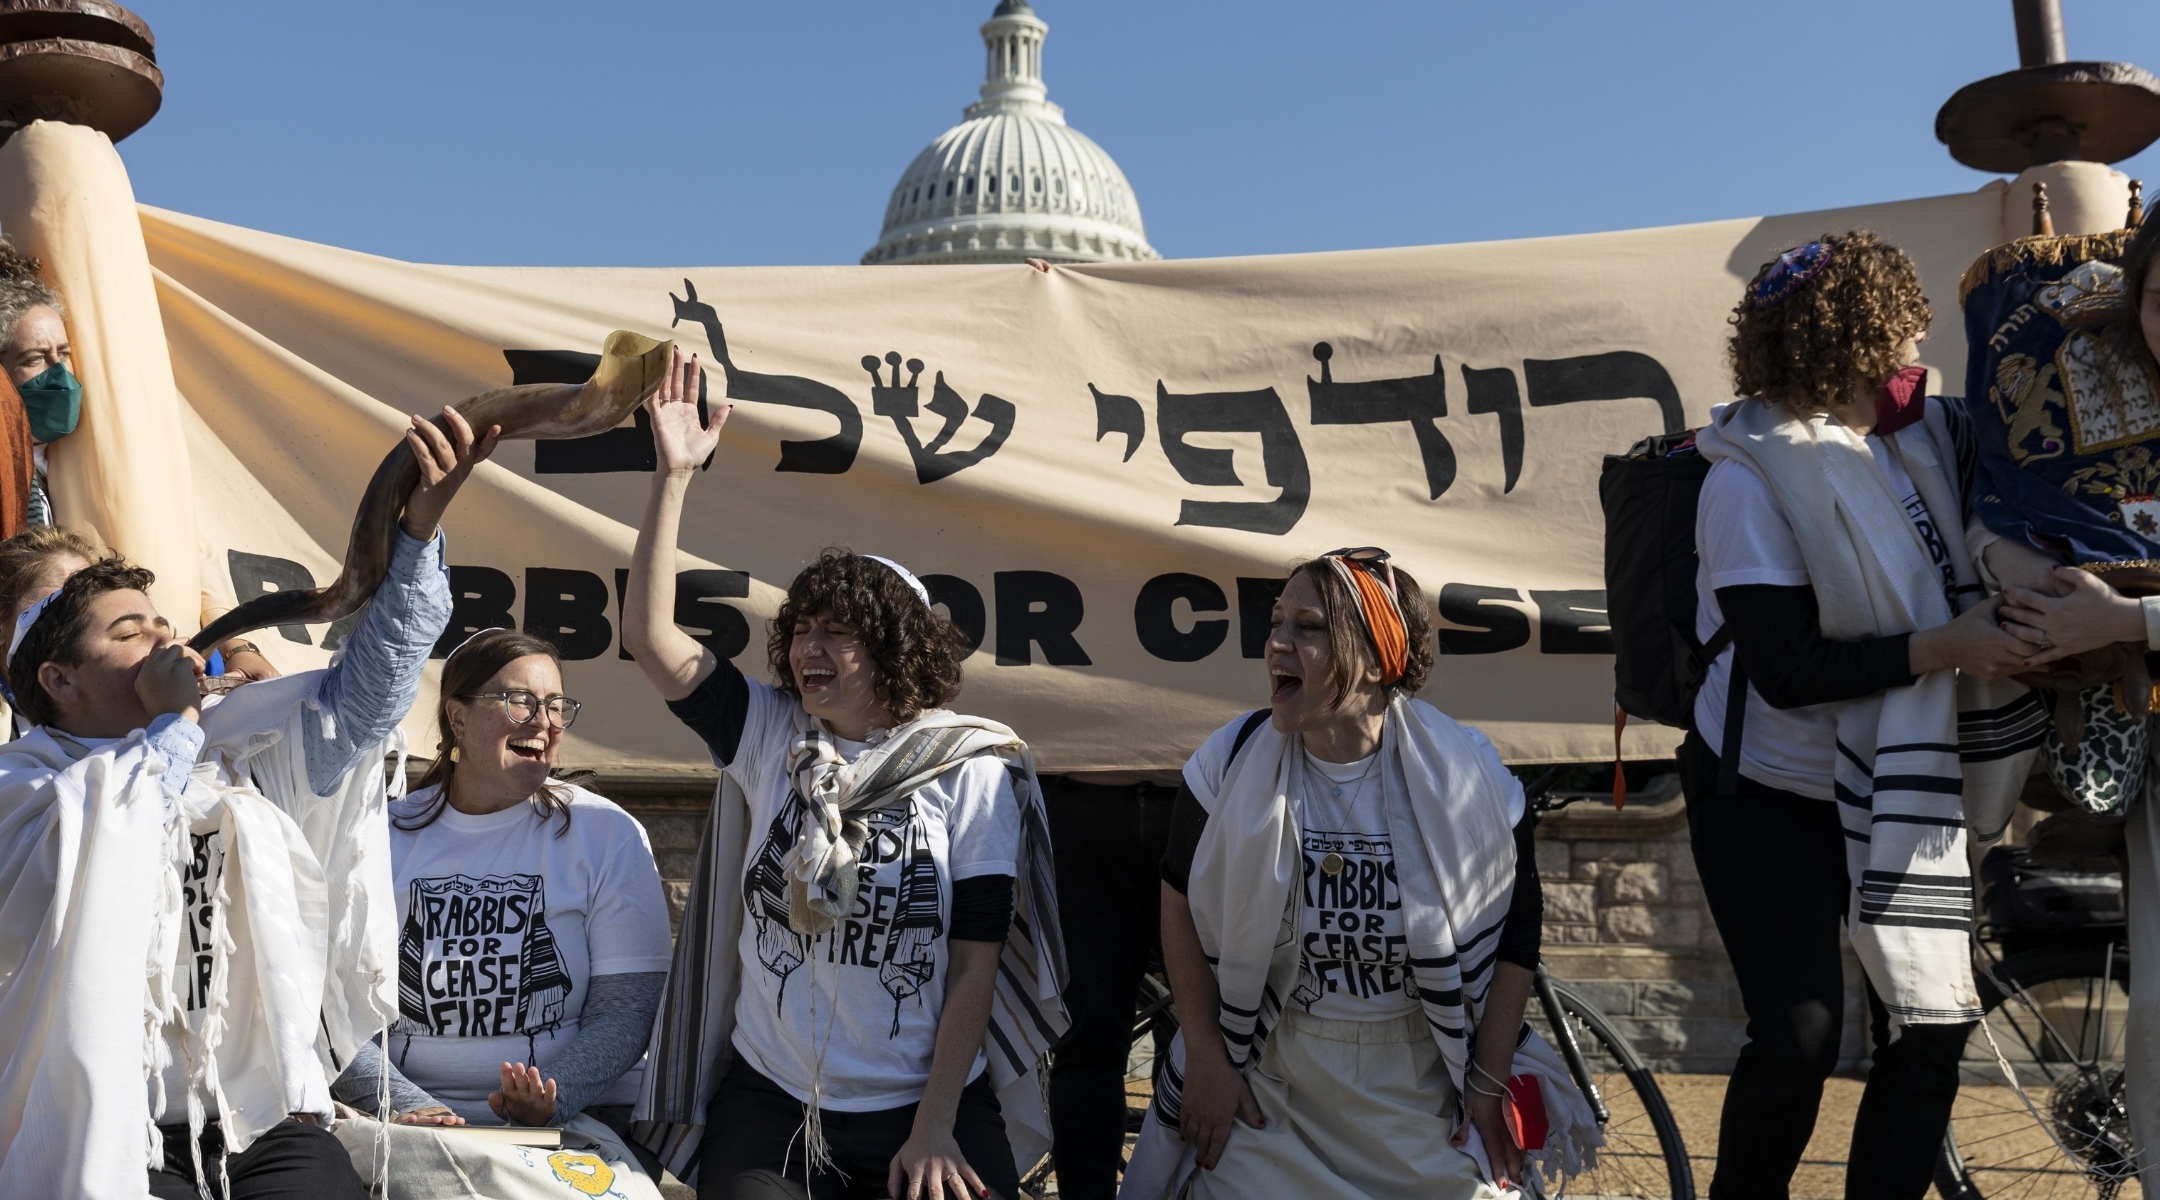 Student rabbi Louisa Solomon (fourth from left, wearing orange headband) attends a Rabbis for Ceasefire prayer and demonstration at Capitol Hill in November 2023. (Mostafa Bassim/Anadolu via Getty Images)